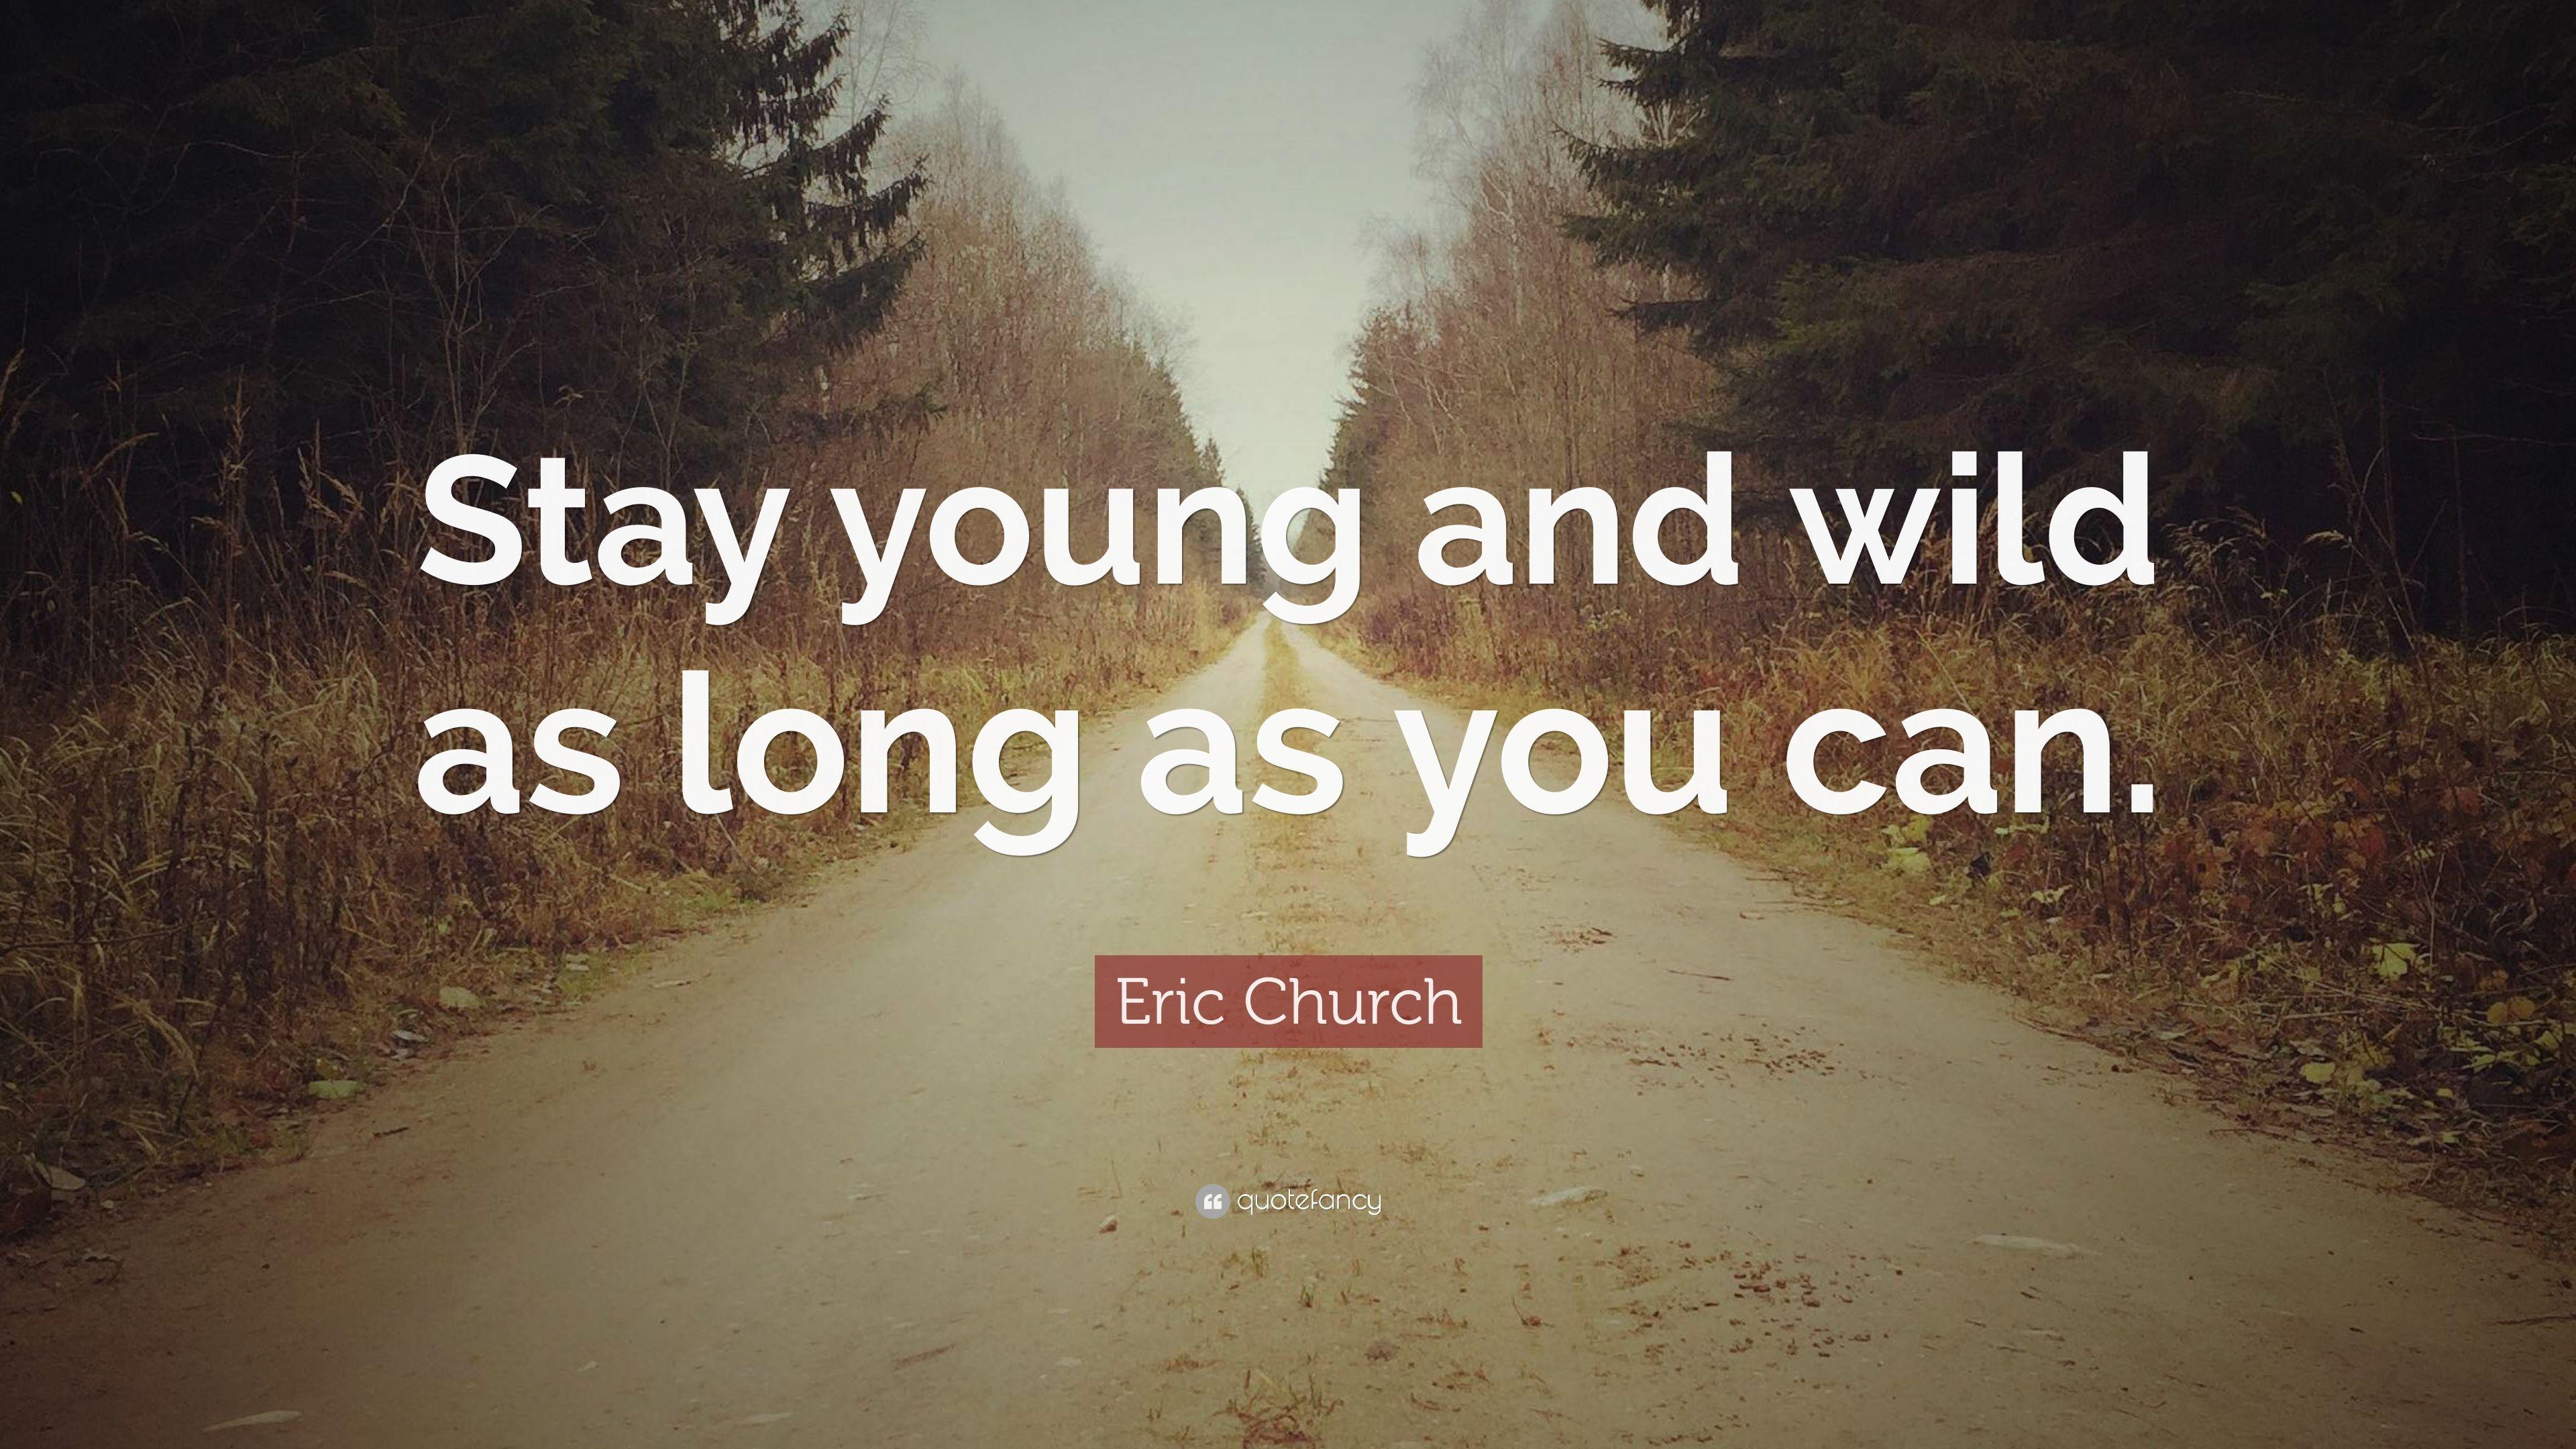 Eric Church Quote: “Stay young and wild as long as you can.” 10